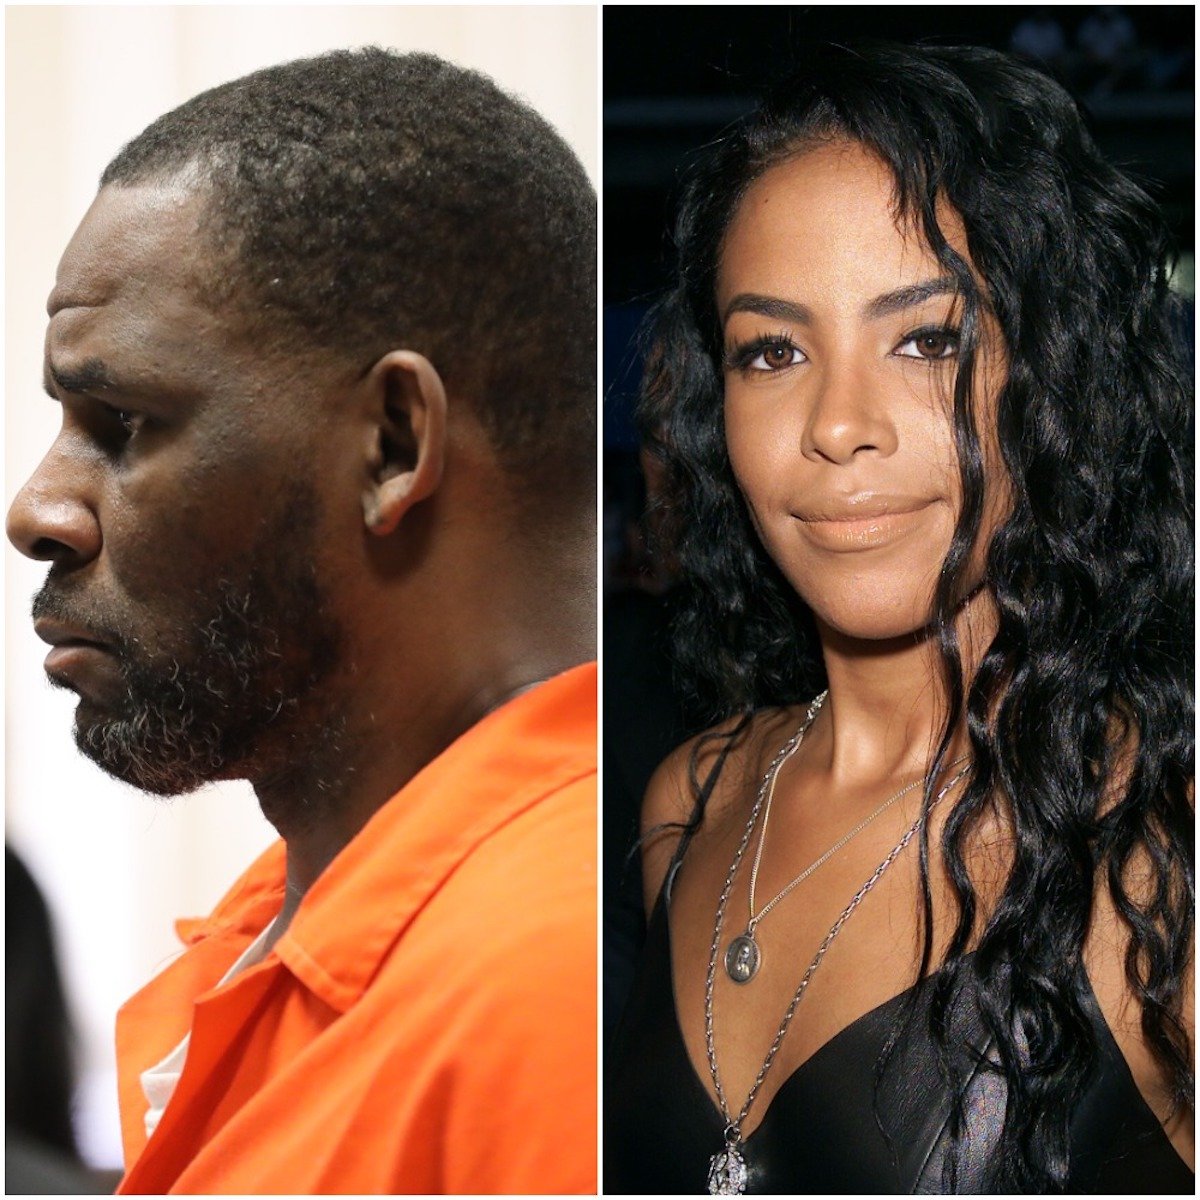 R Kelly S Legal Team Admits To His Relationship With Aaliyah As Part Of Defense Strategy During